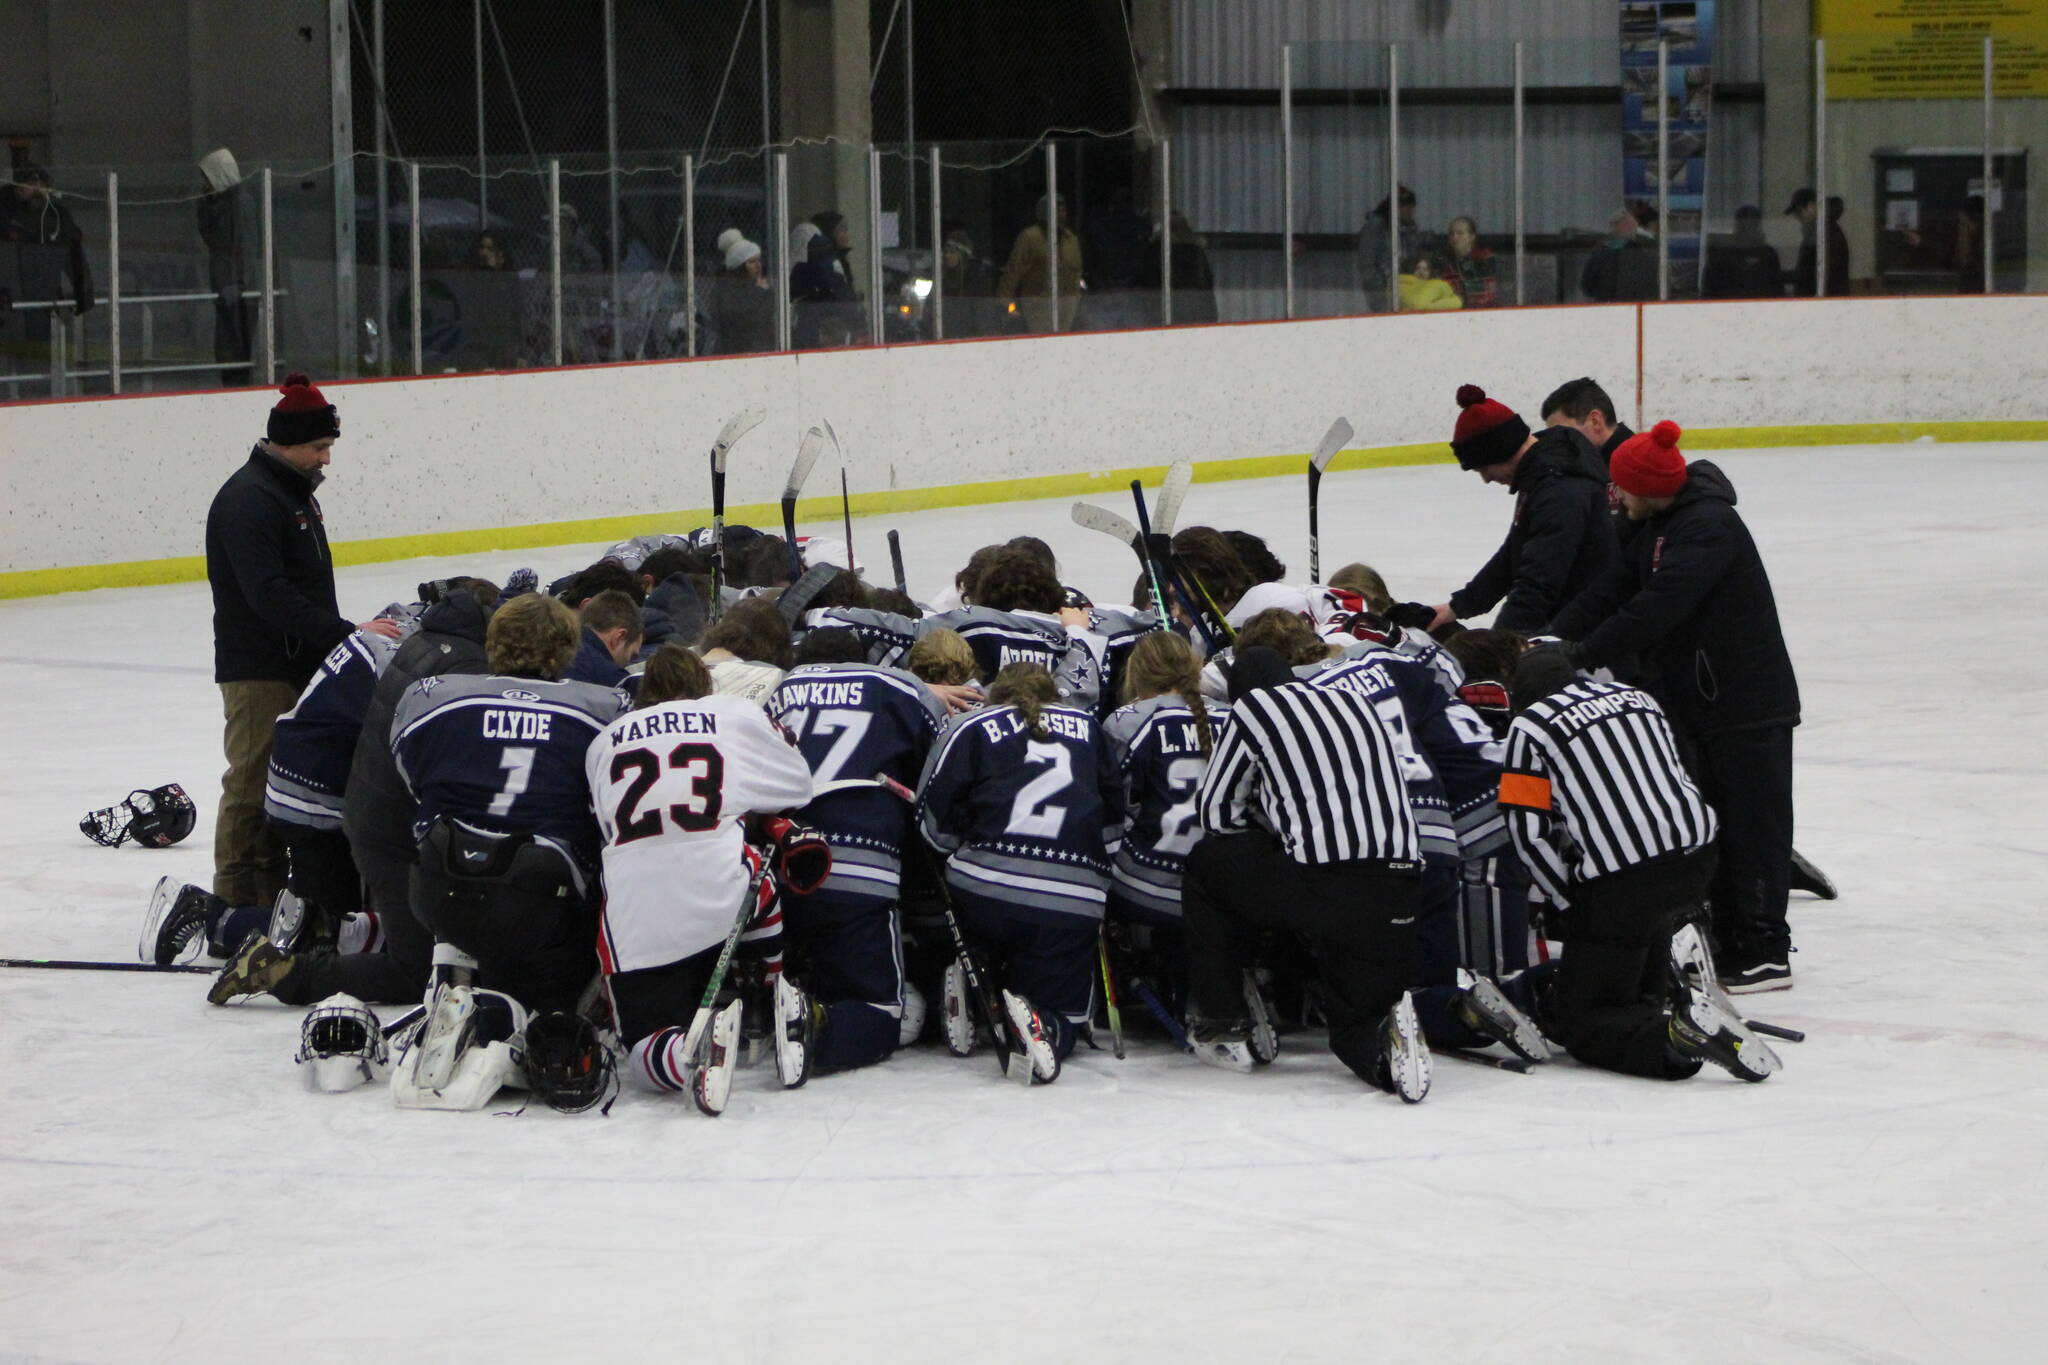 The SoHi and Kenai Central hockey teams meet at center ice to pray for the Clyde family after the game on Thursday, Dec. 16, 2022 at the Kenai Multi-Purpose Facility in Kenai, Alaska. Tanner Clyde, a SoHi goalie, lost his father to a fatal car collision earlier this week. (Photo courtesy Rylie Thompson)